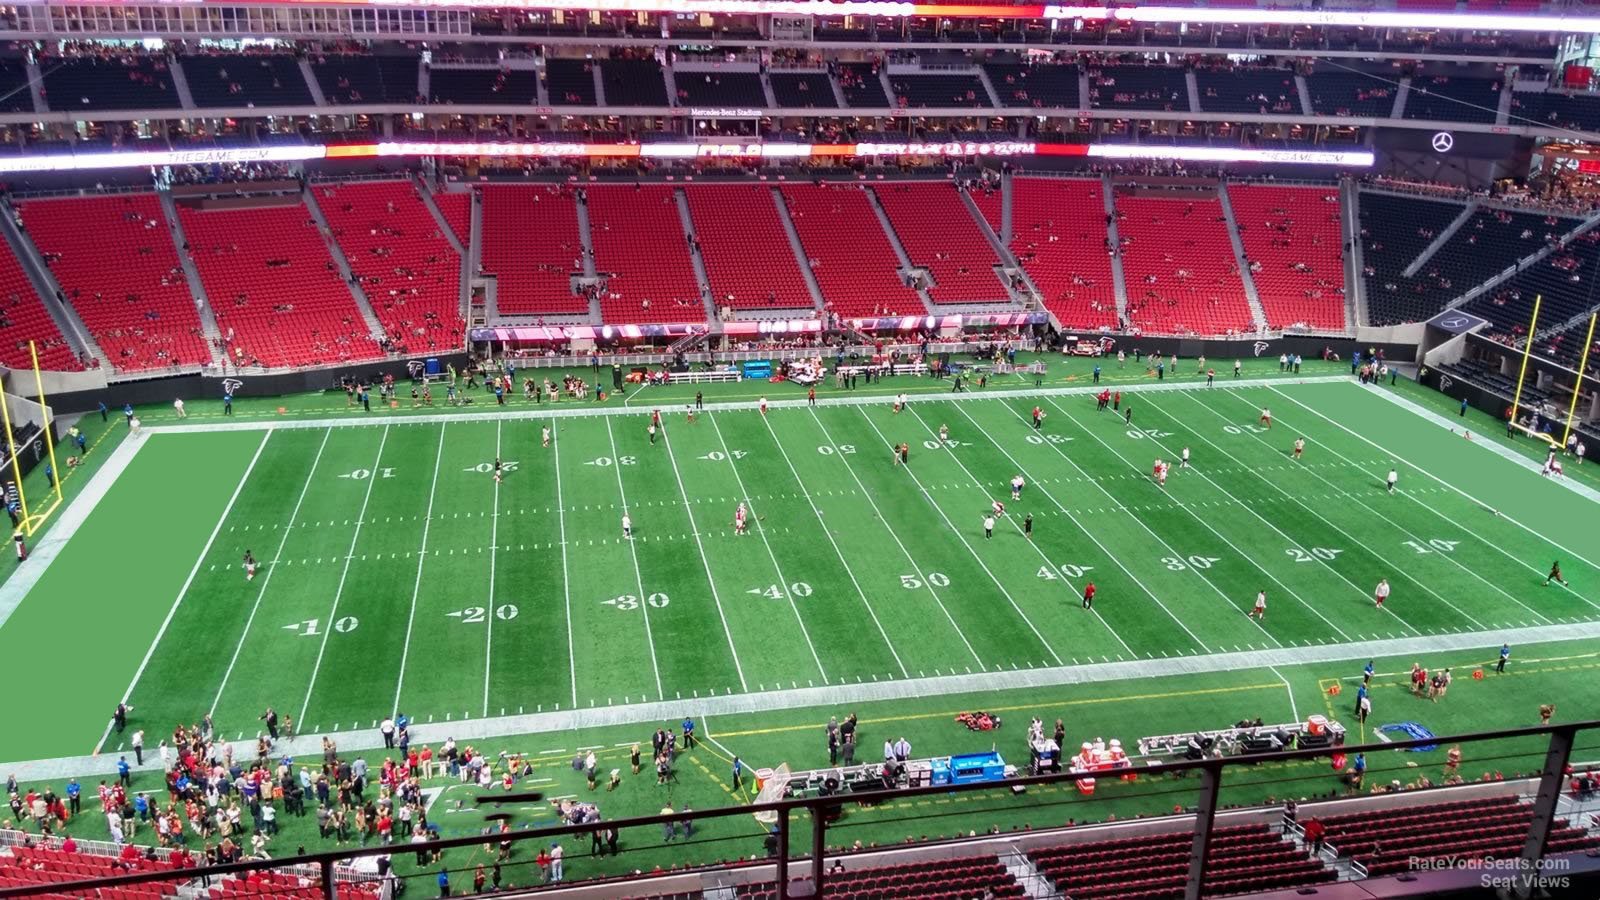 section 313, row 4 seat view  for football - mercedes-benz stadium